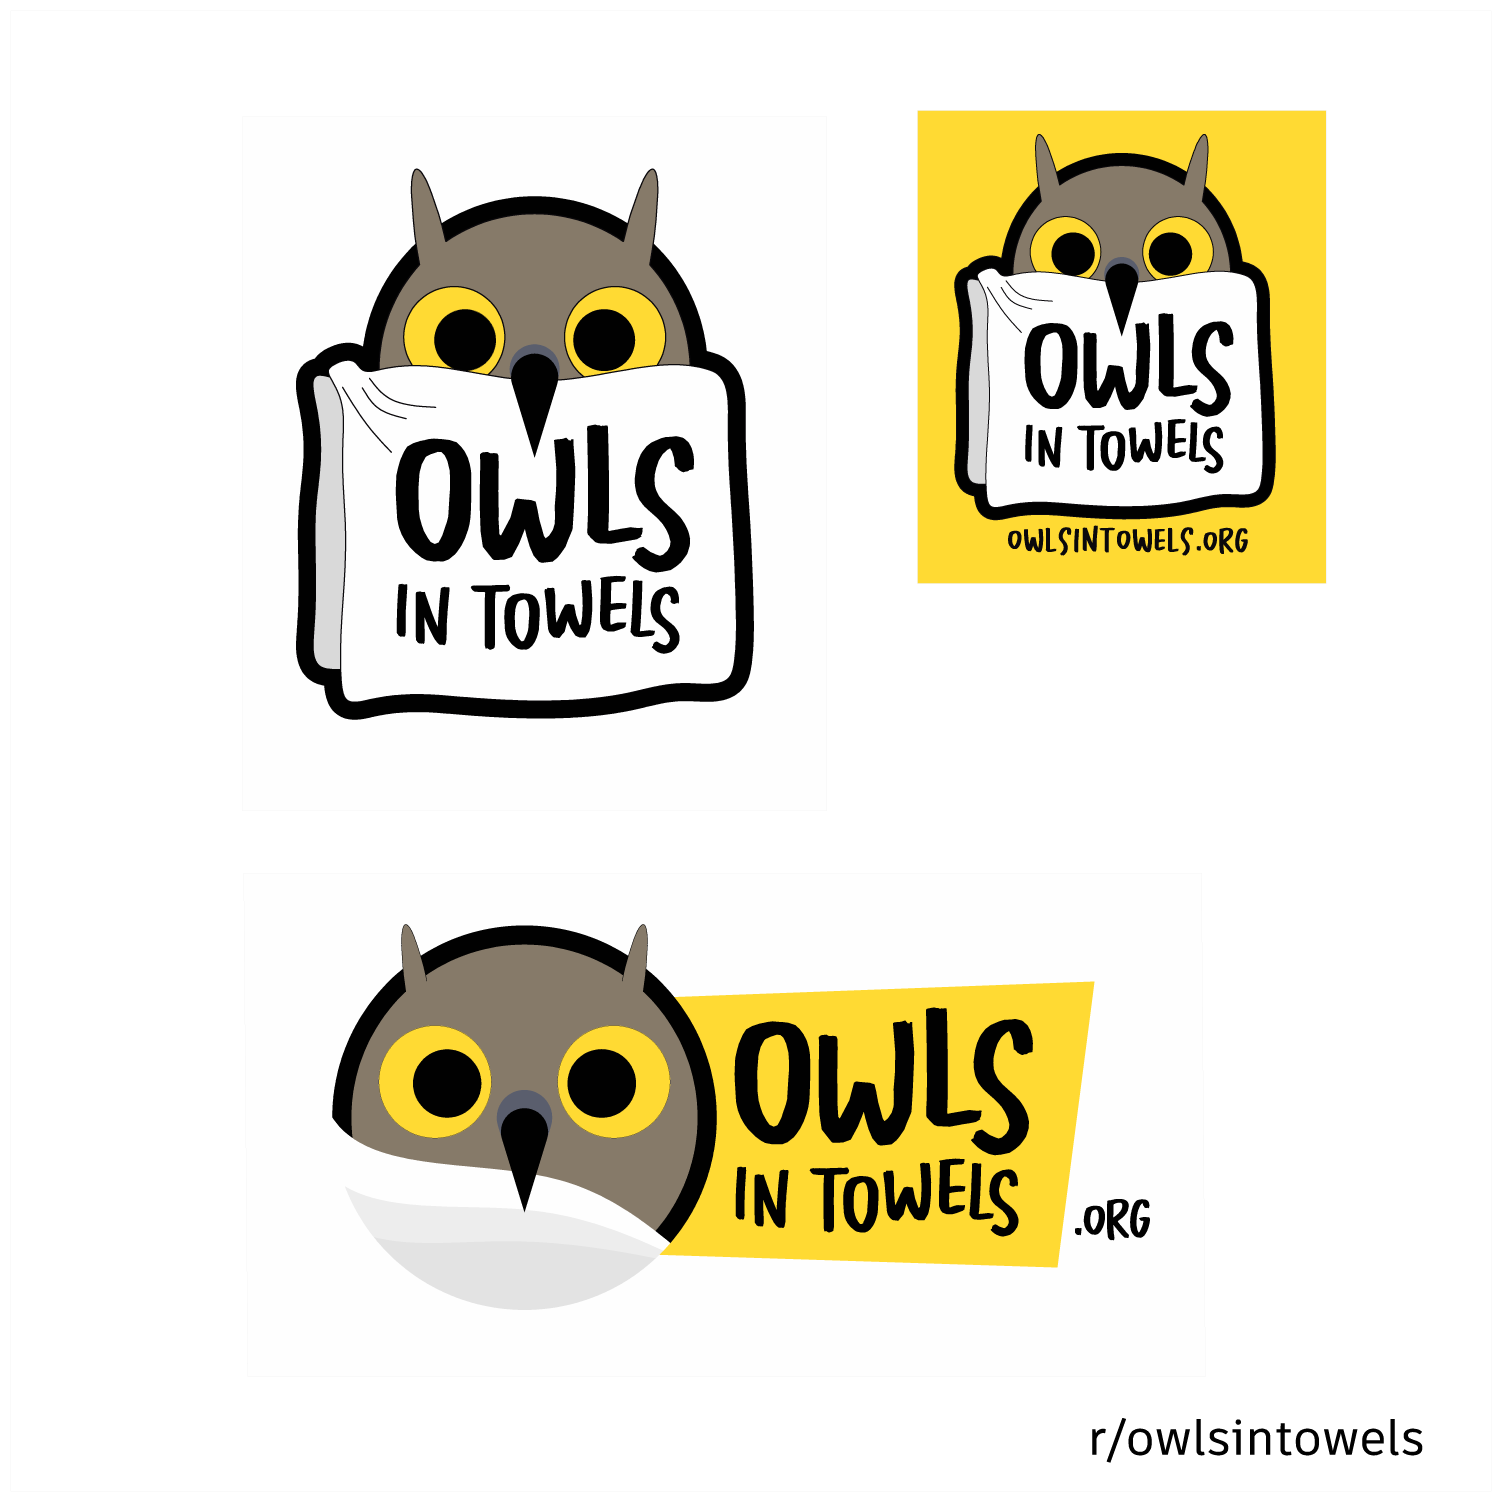 My attempt at designing a impress for ‘Owls in Towels’